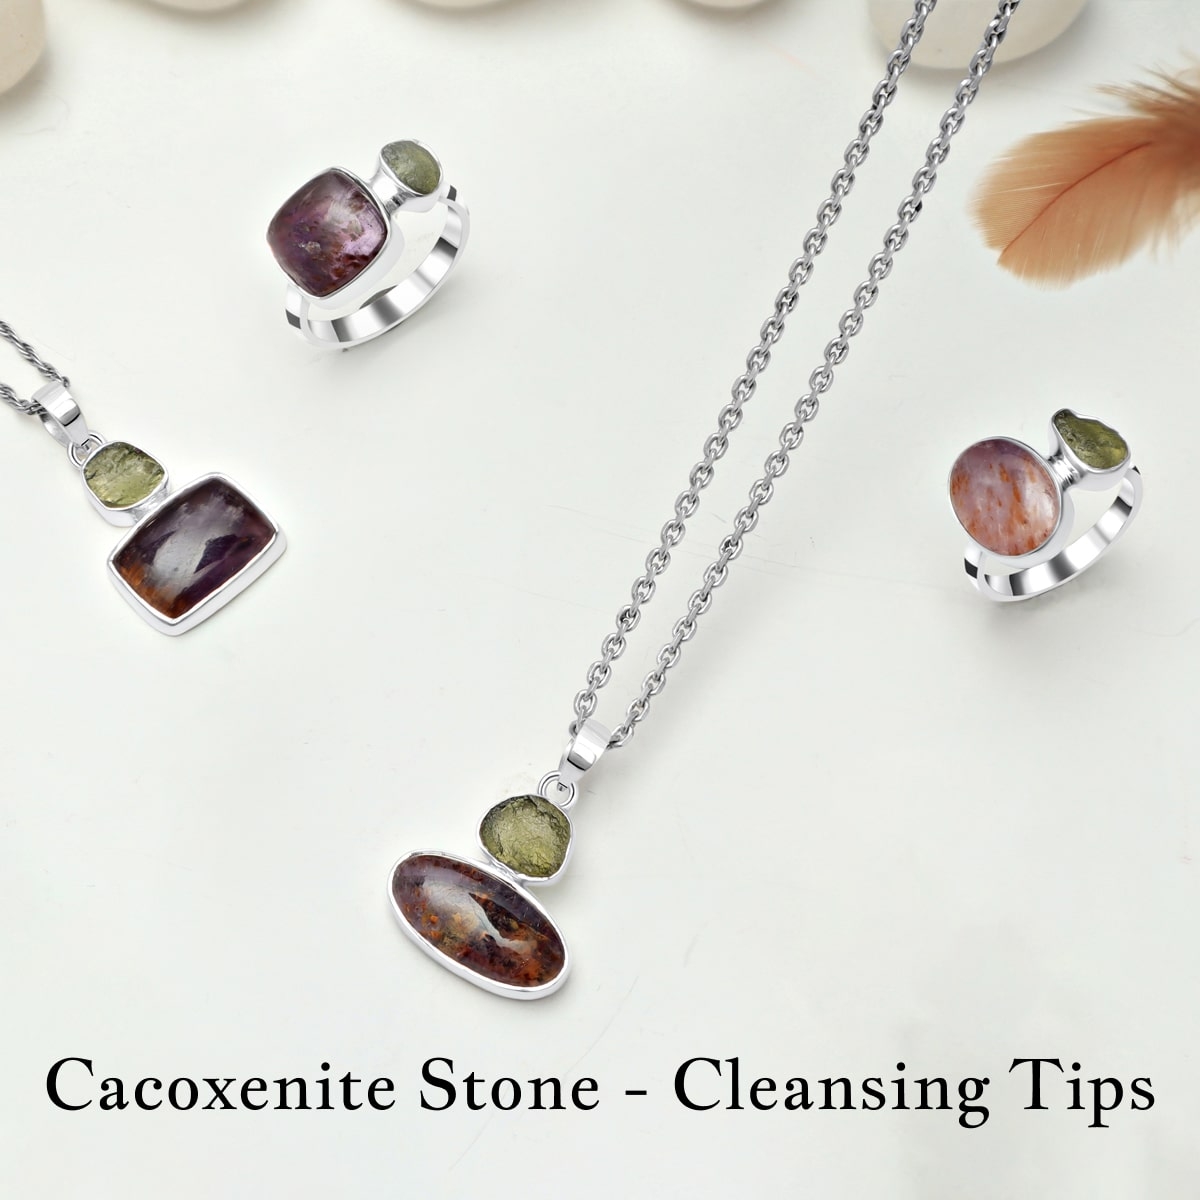 How to Cleanse your Cacoxenite stone